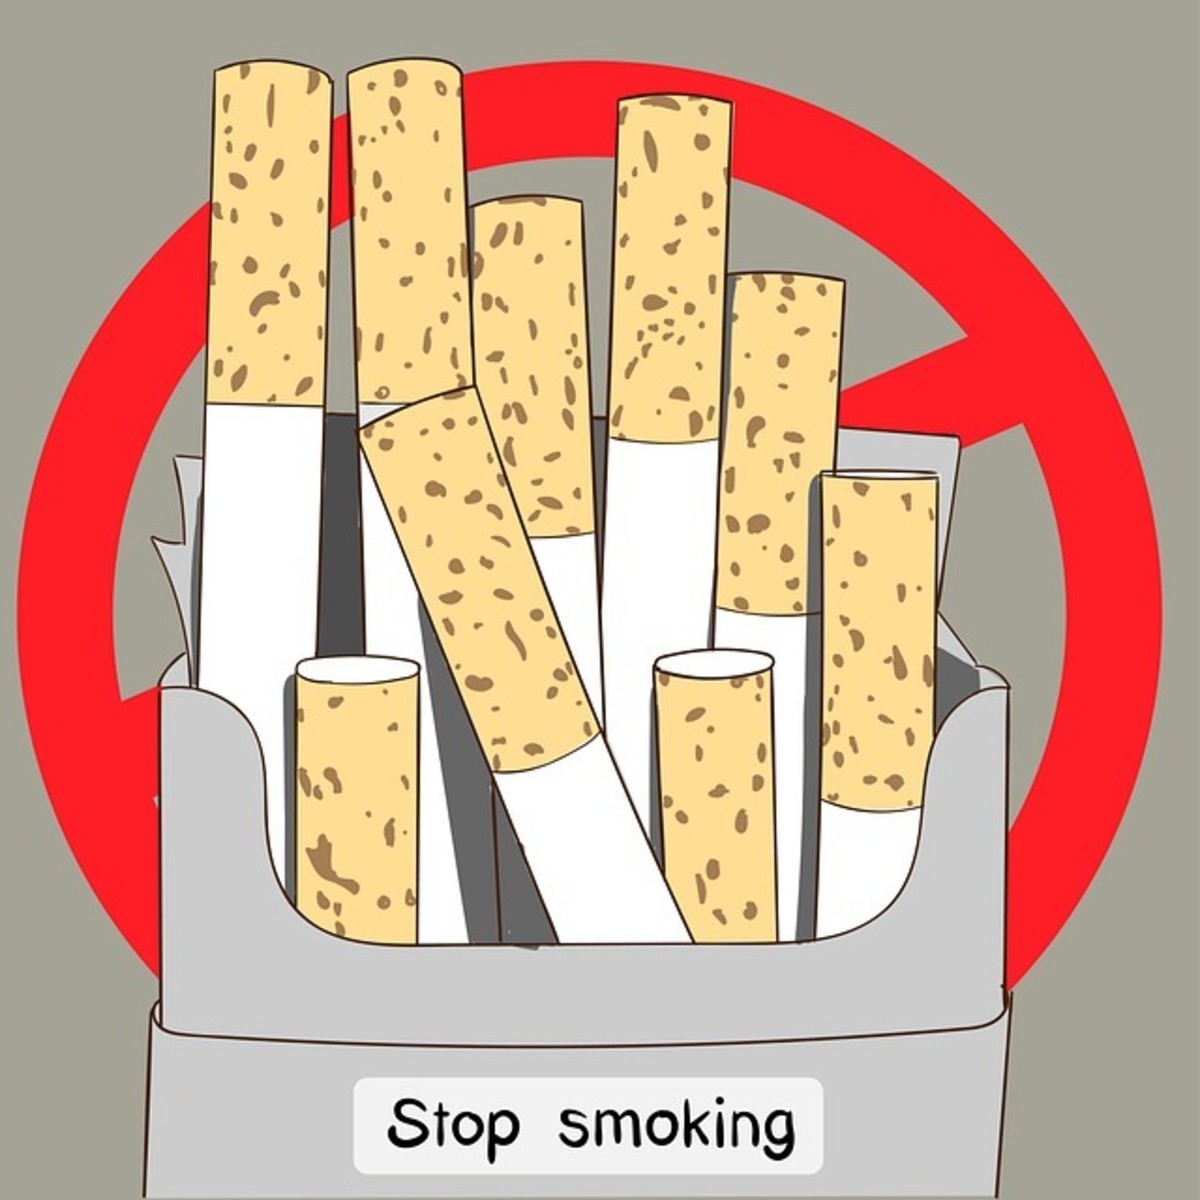 How to Quit Smoking: Here Are 9 Ways to Help You